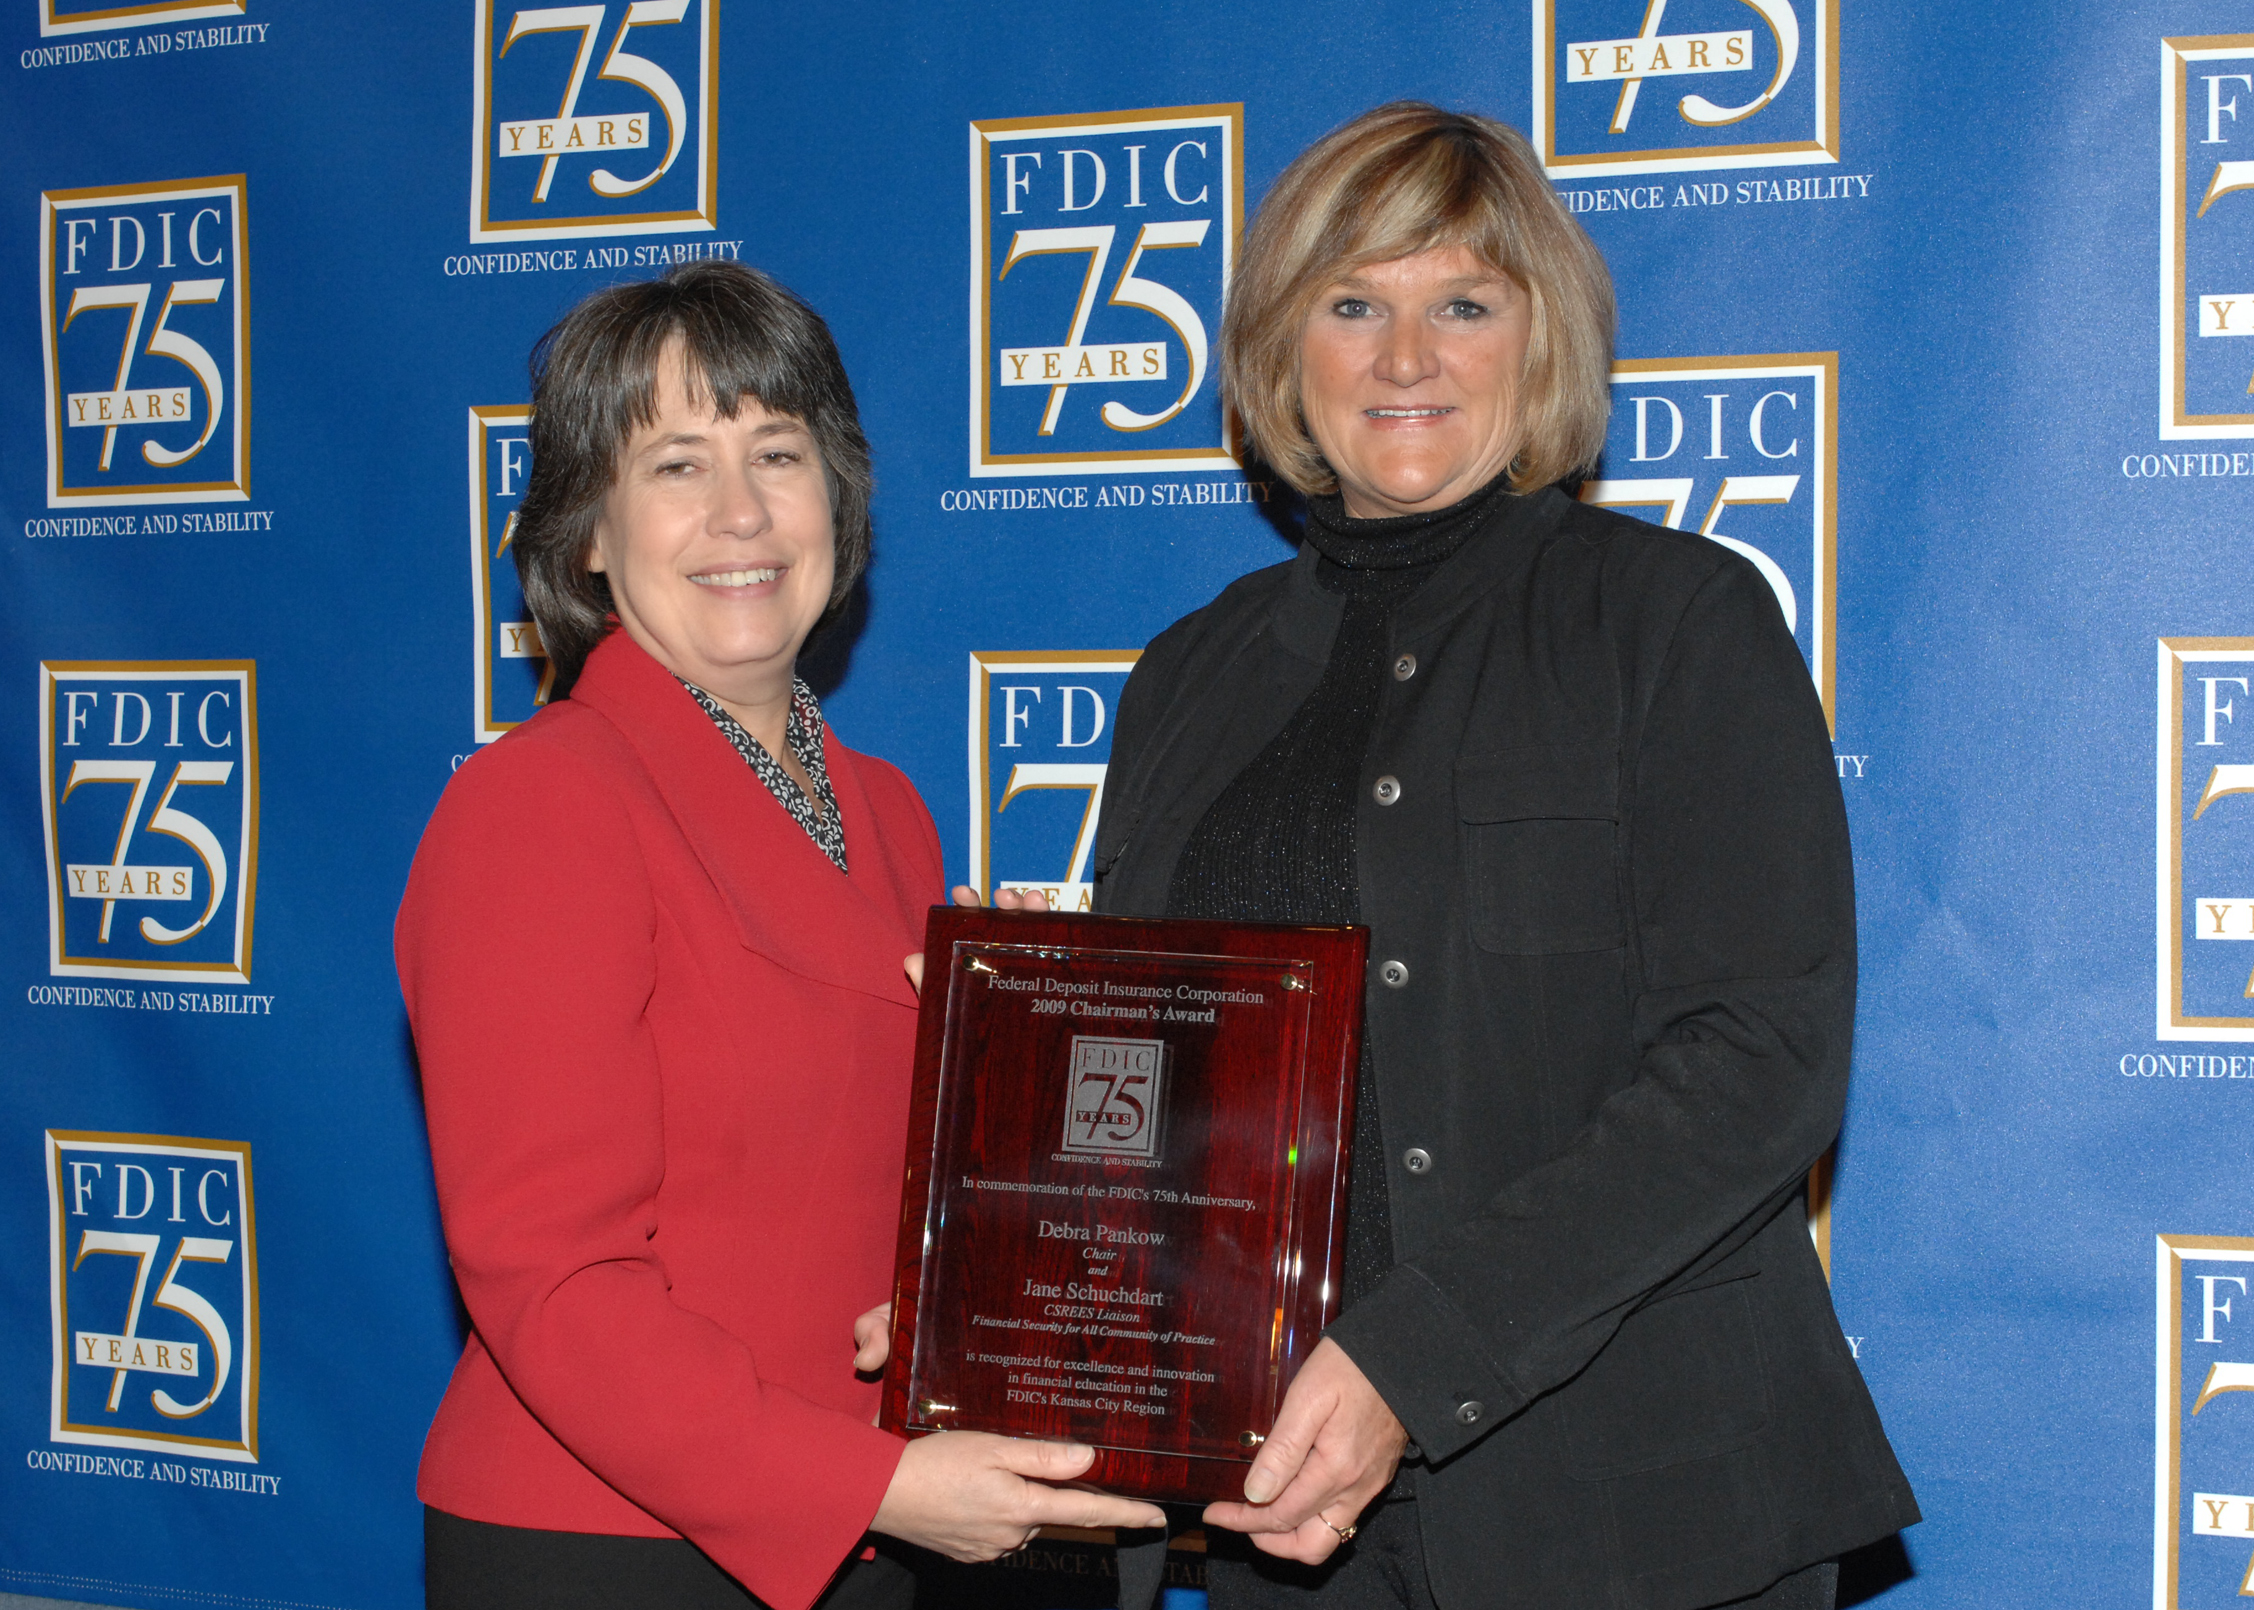 NDSU Extension Service family economics specialist Debra Pankow, right, receives the Chairman's Award for Innovation in Financial Education from Sheila Bair, FDIC chairwoman.